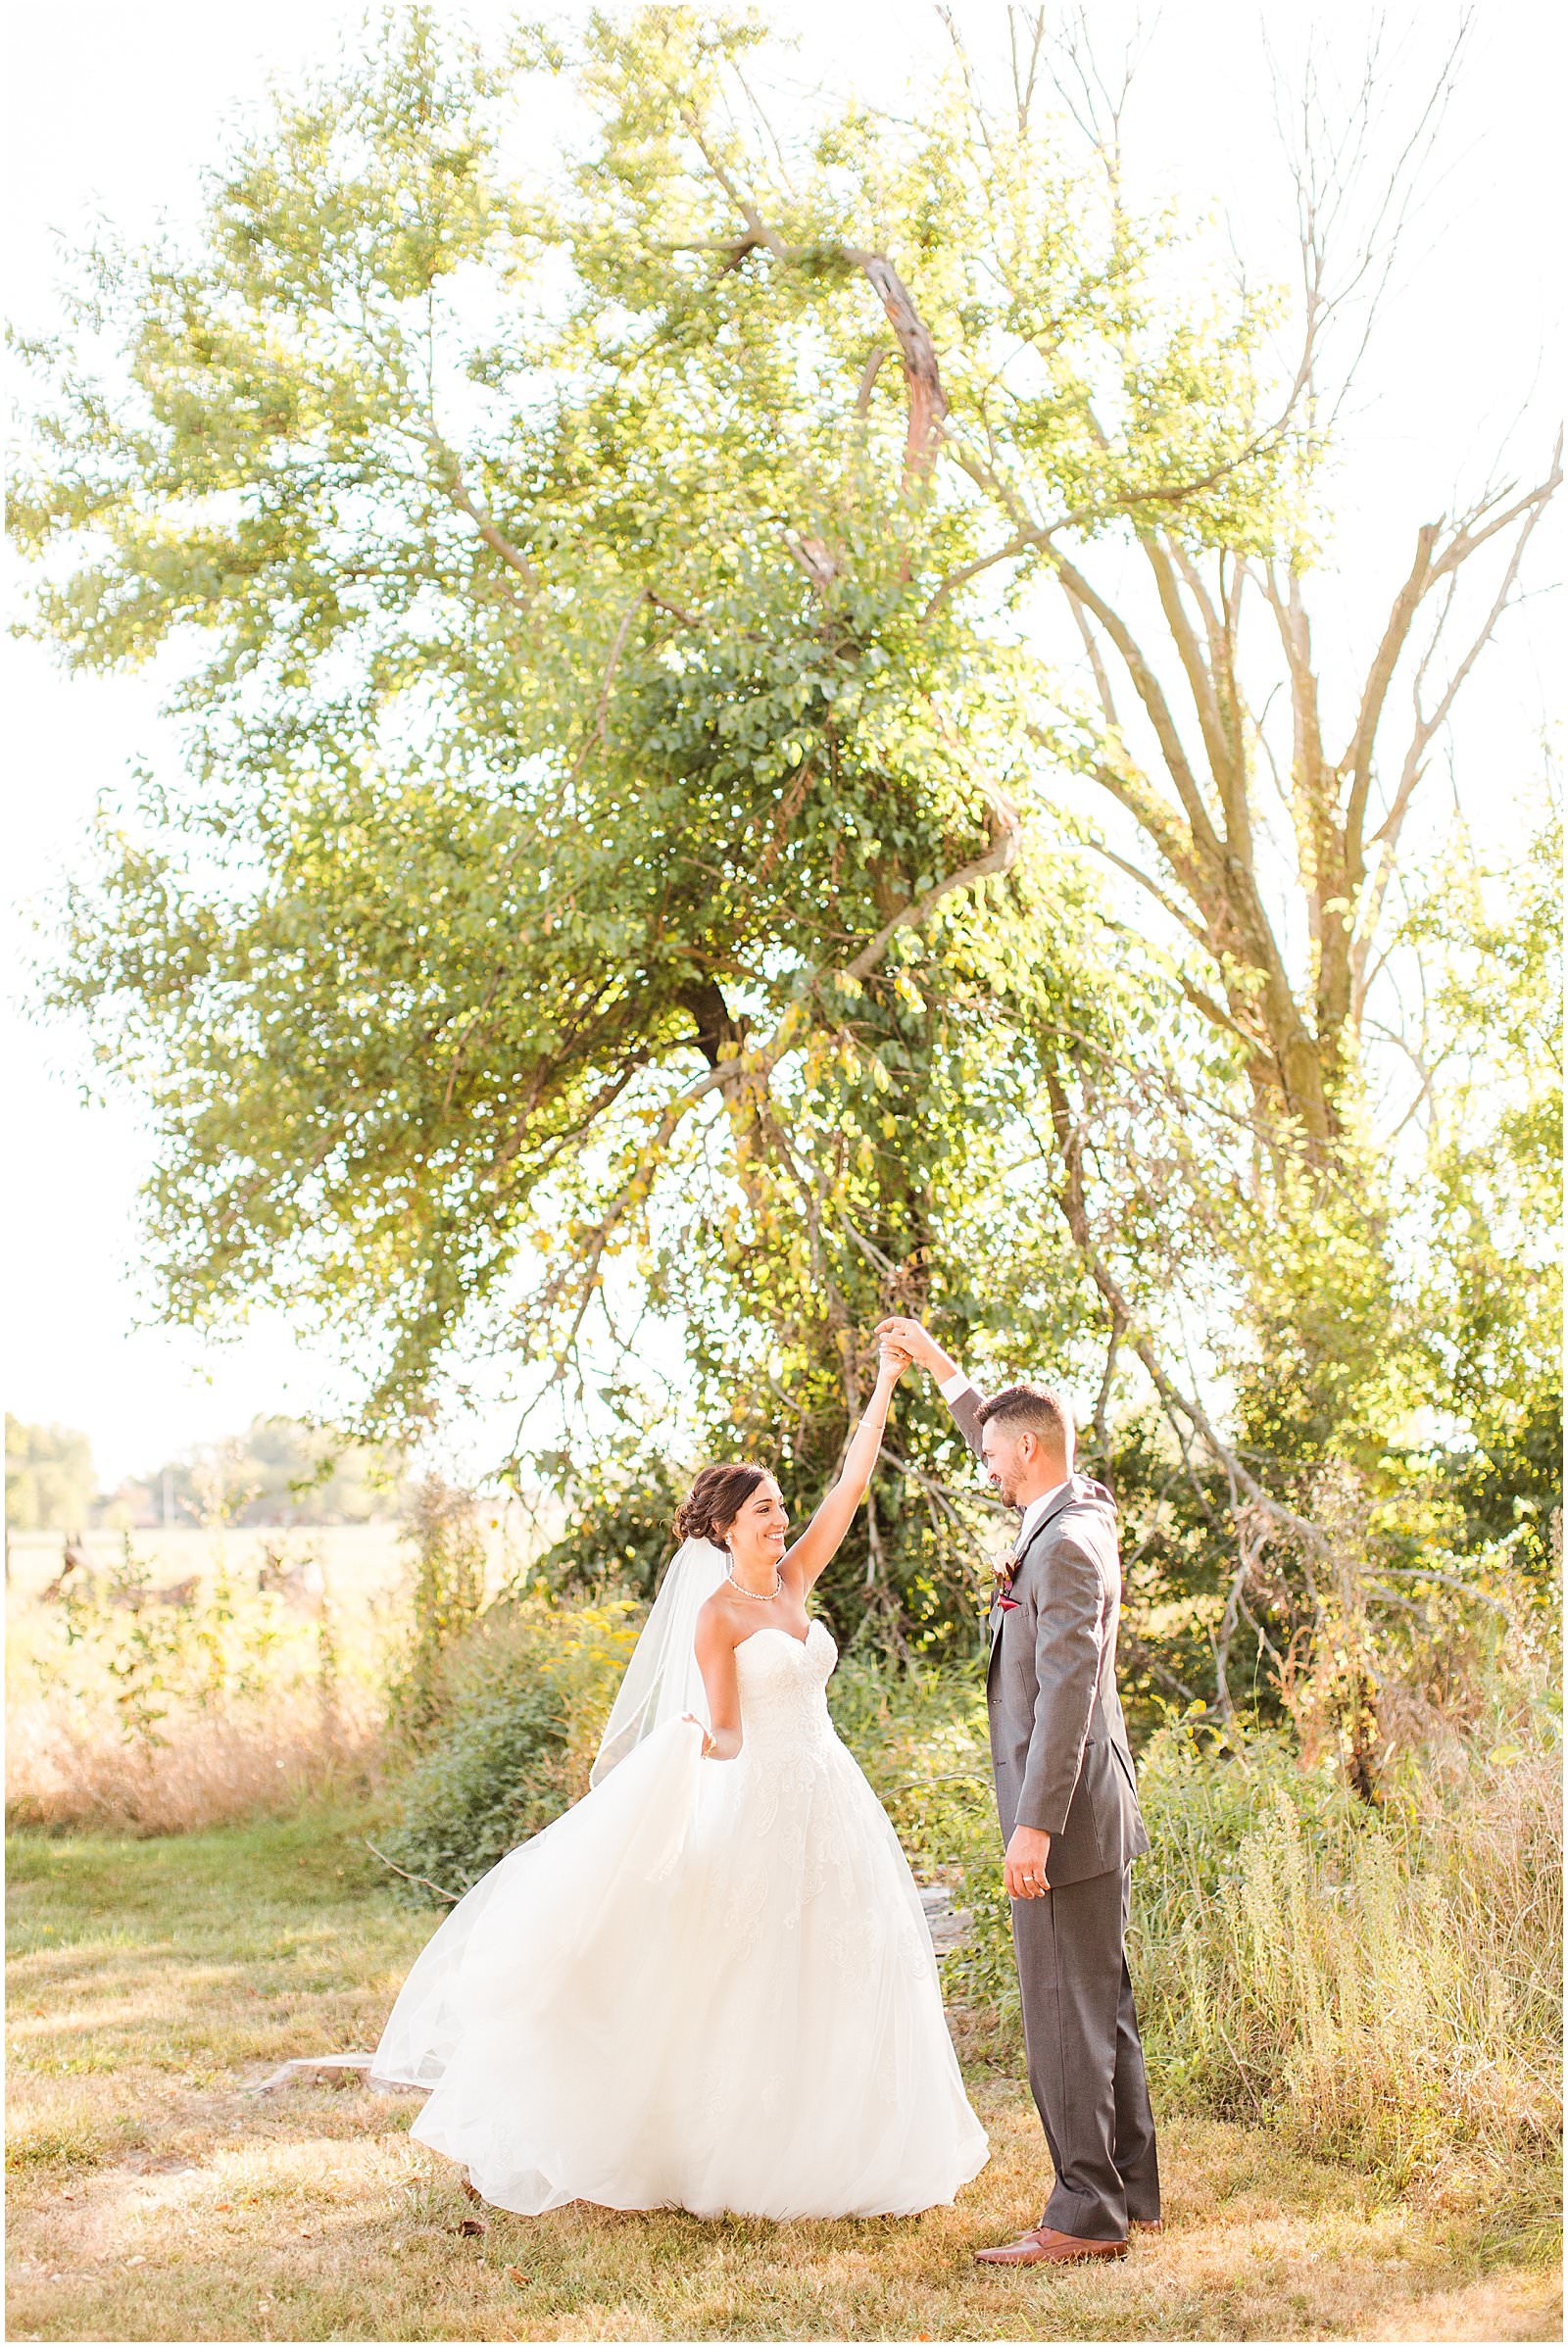 A Stunning Fall Wedding in Indianapolis, IN |. Sally and Andrew | Bret and Brandie Photography 0129.jpg